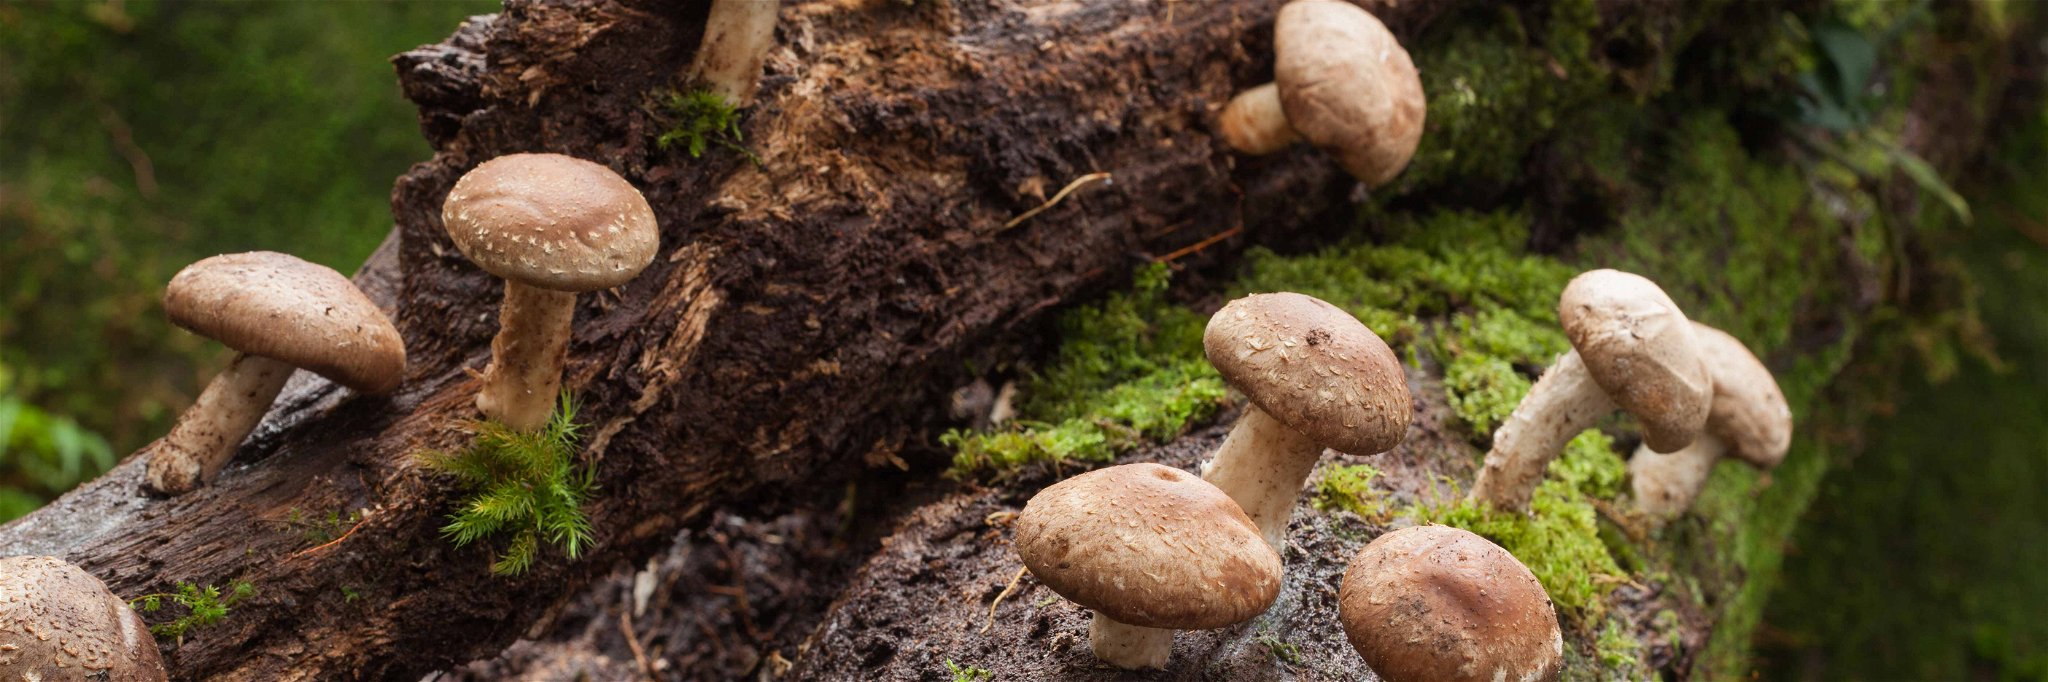 Shiitake is one of the best-known medicinal mushrooms.